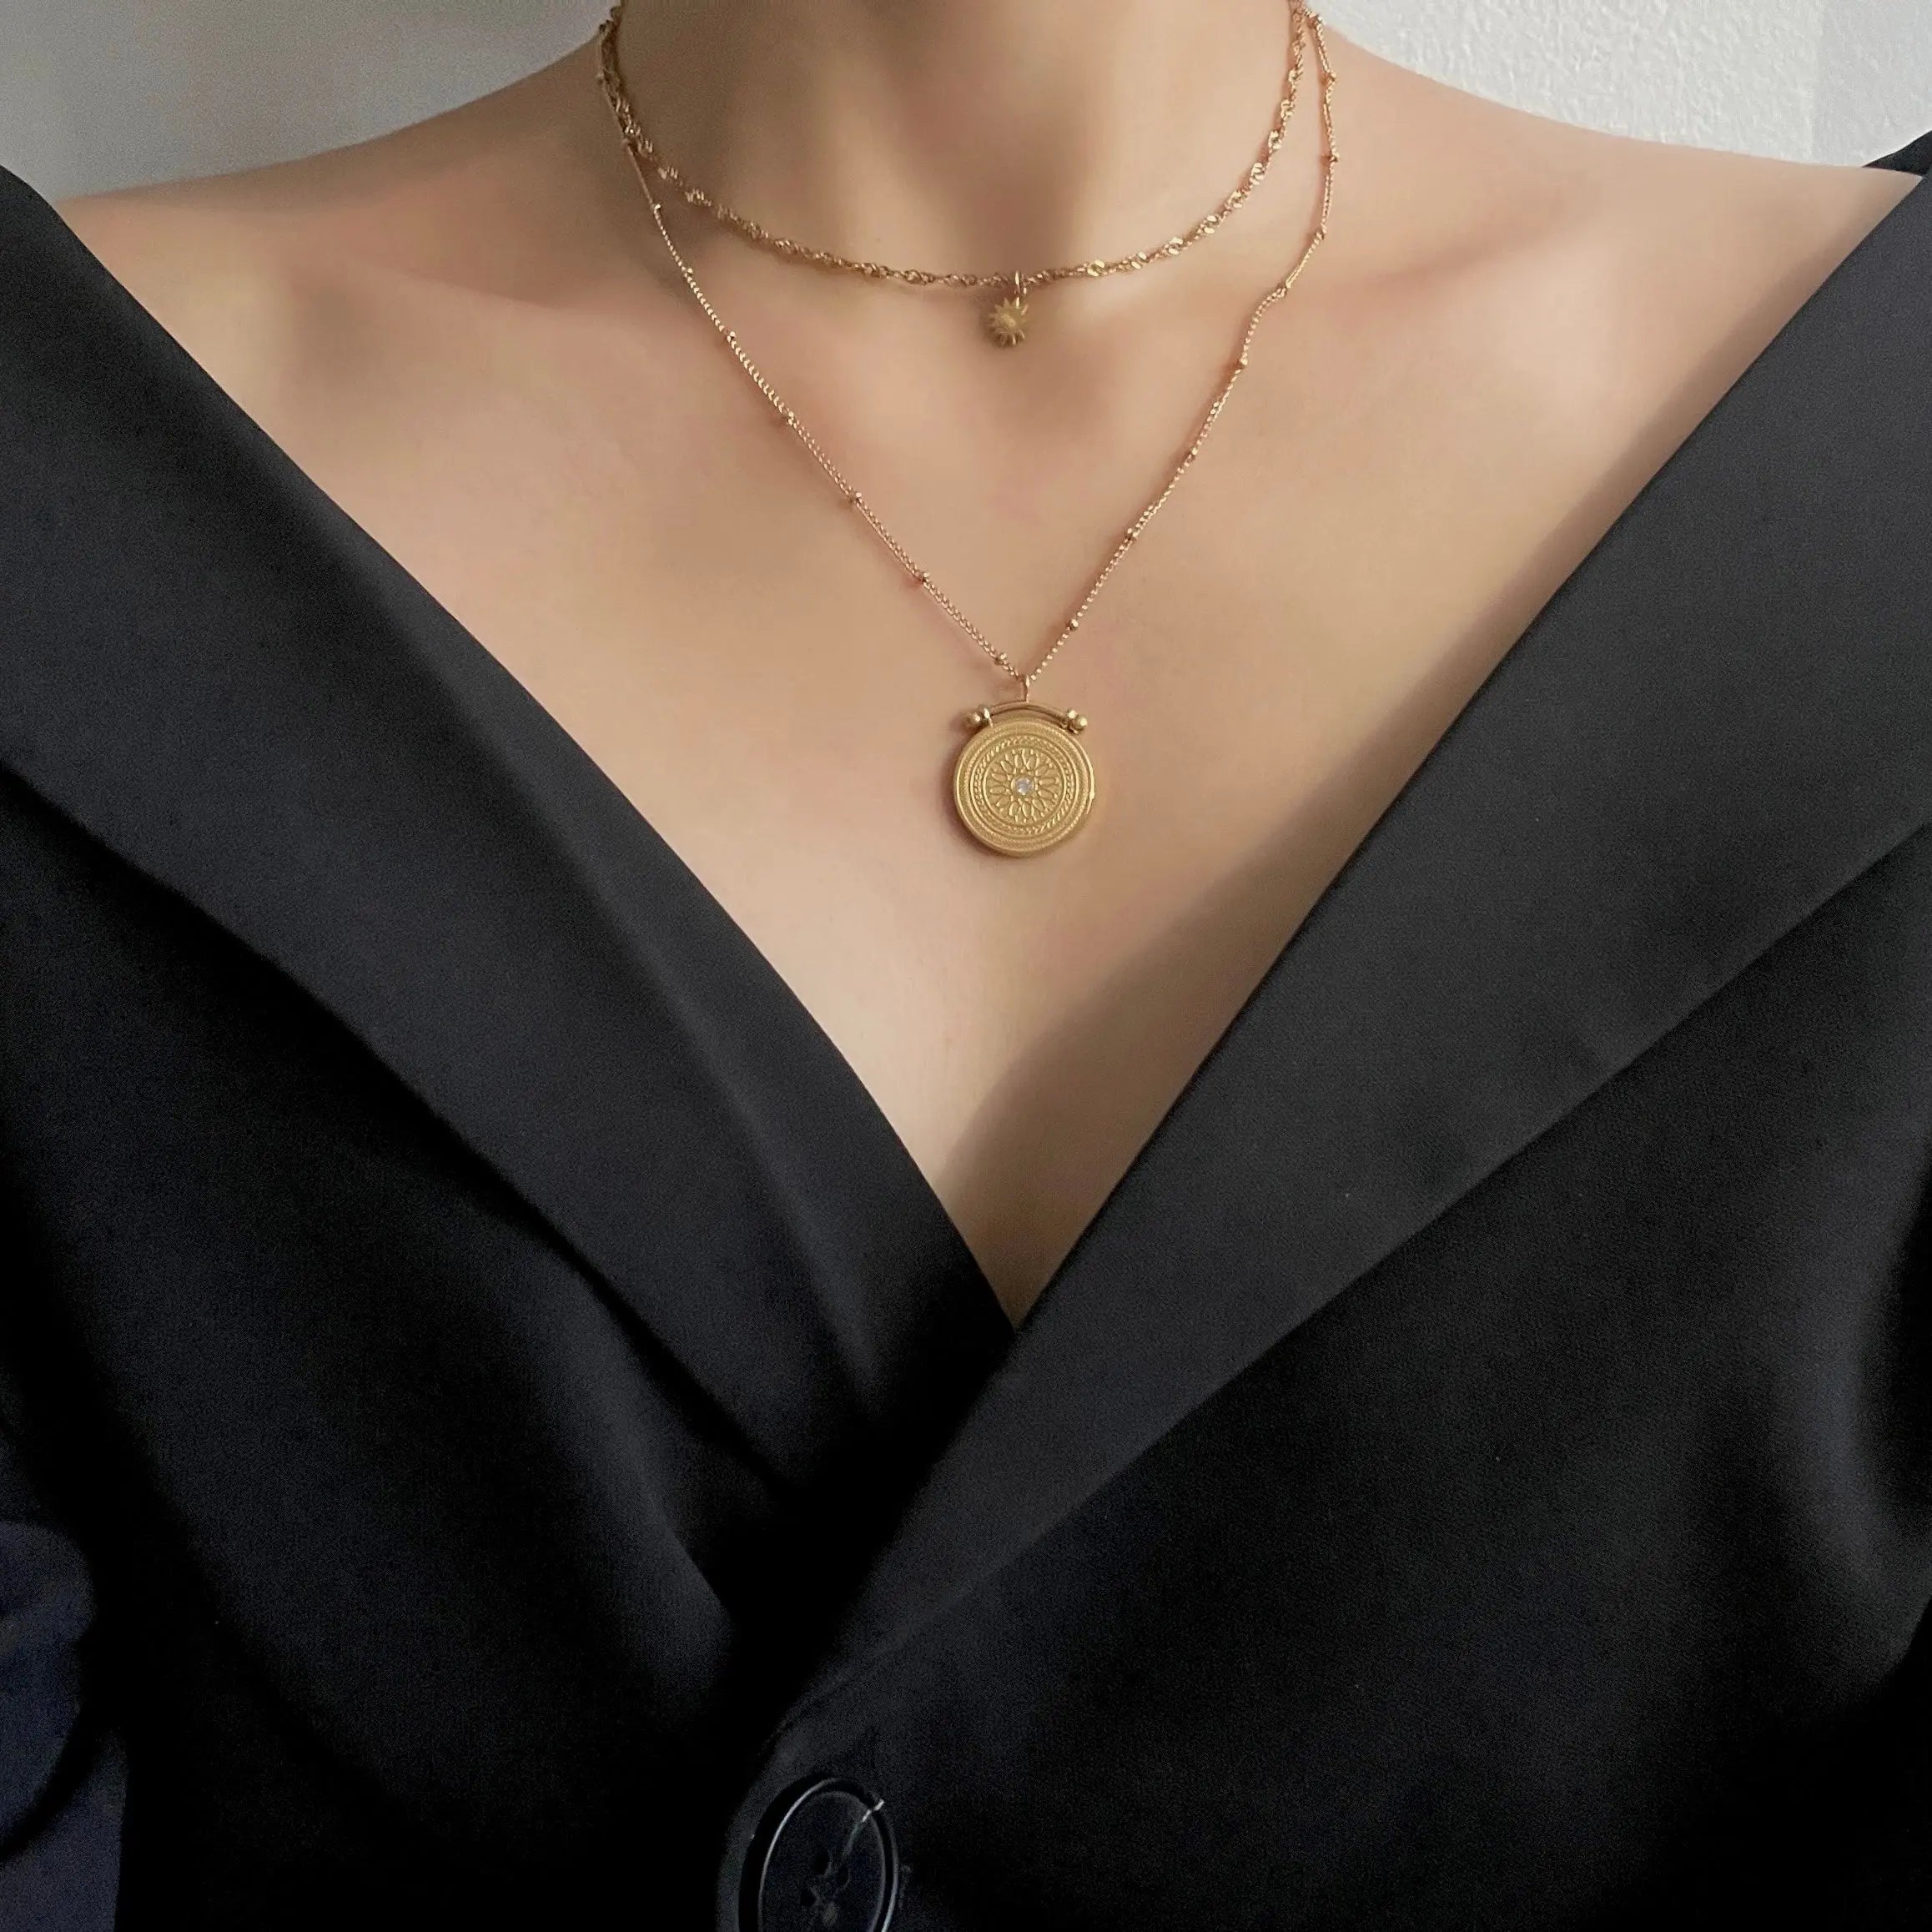 Stylish and Water-Resistant Gold Plated necklace- Perfect timeless necessary for every occasion